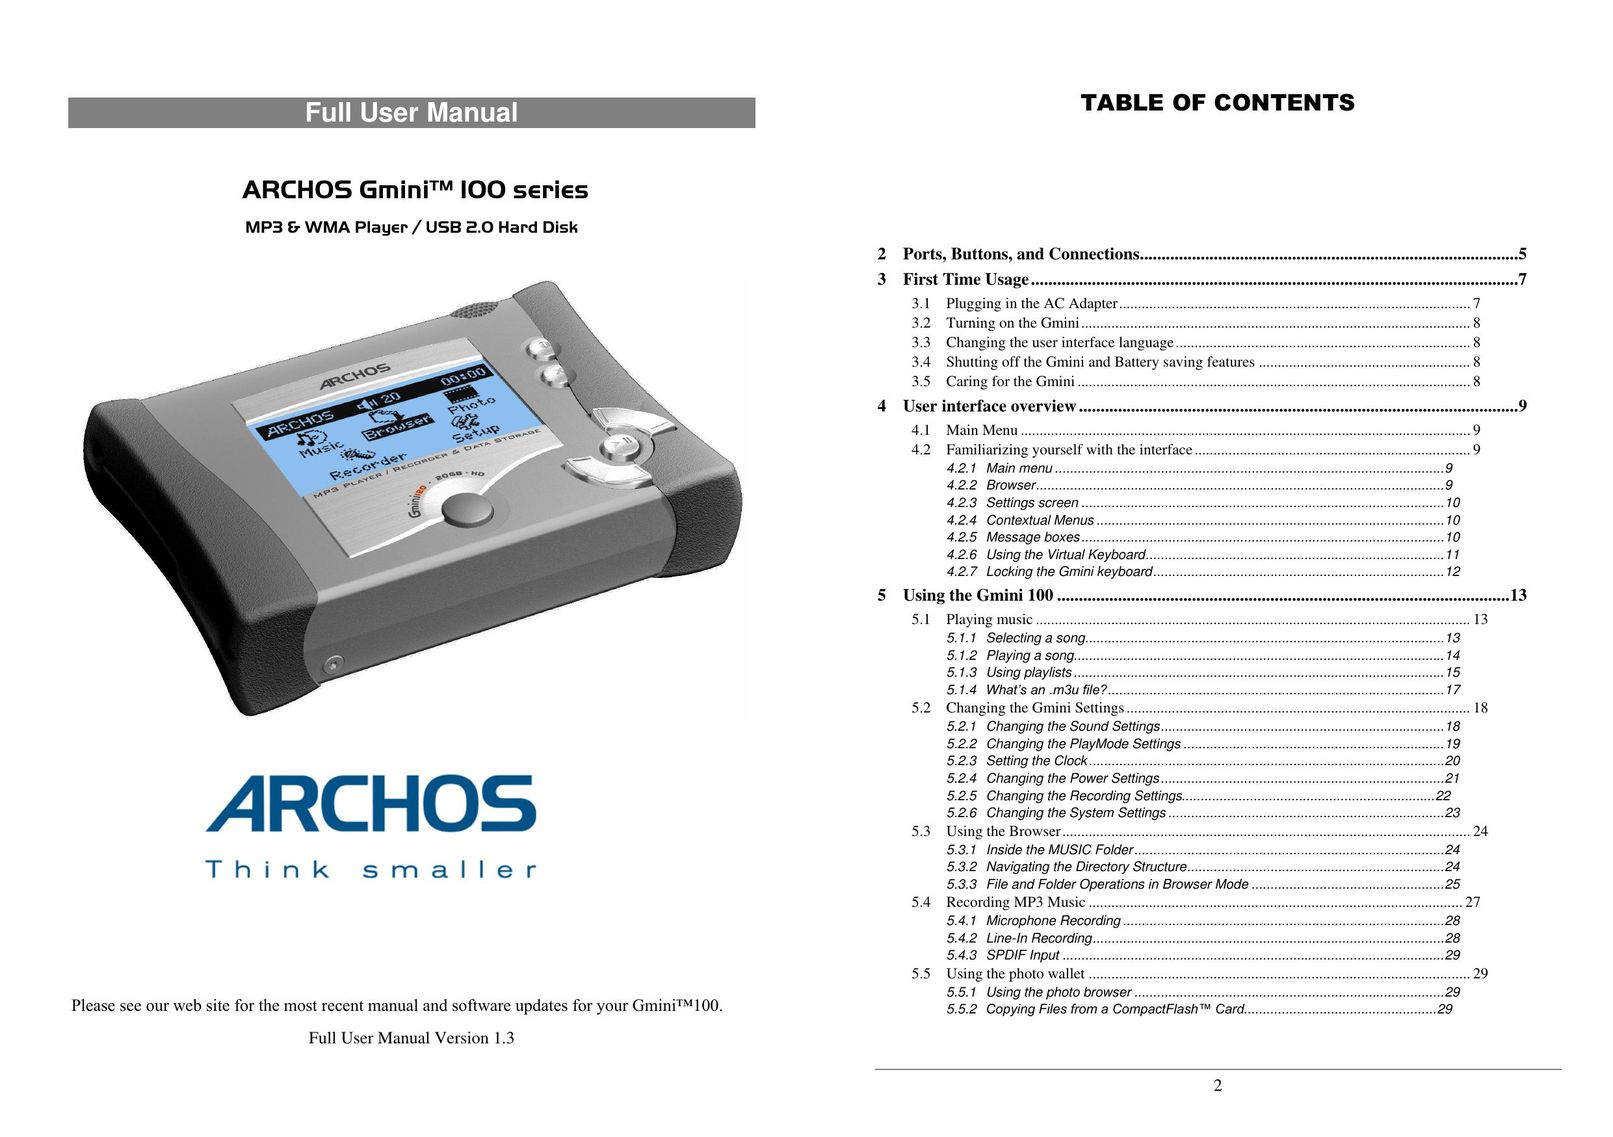 Archos 100 series MP3 Player User Manual